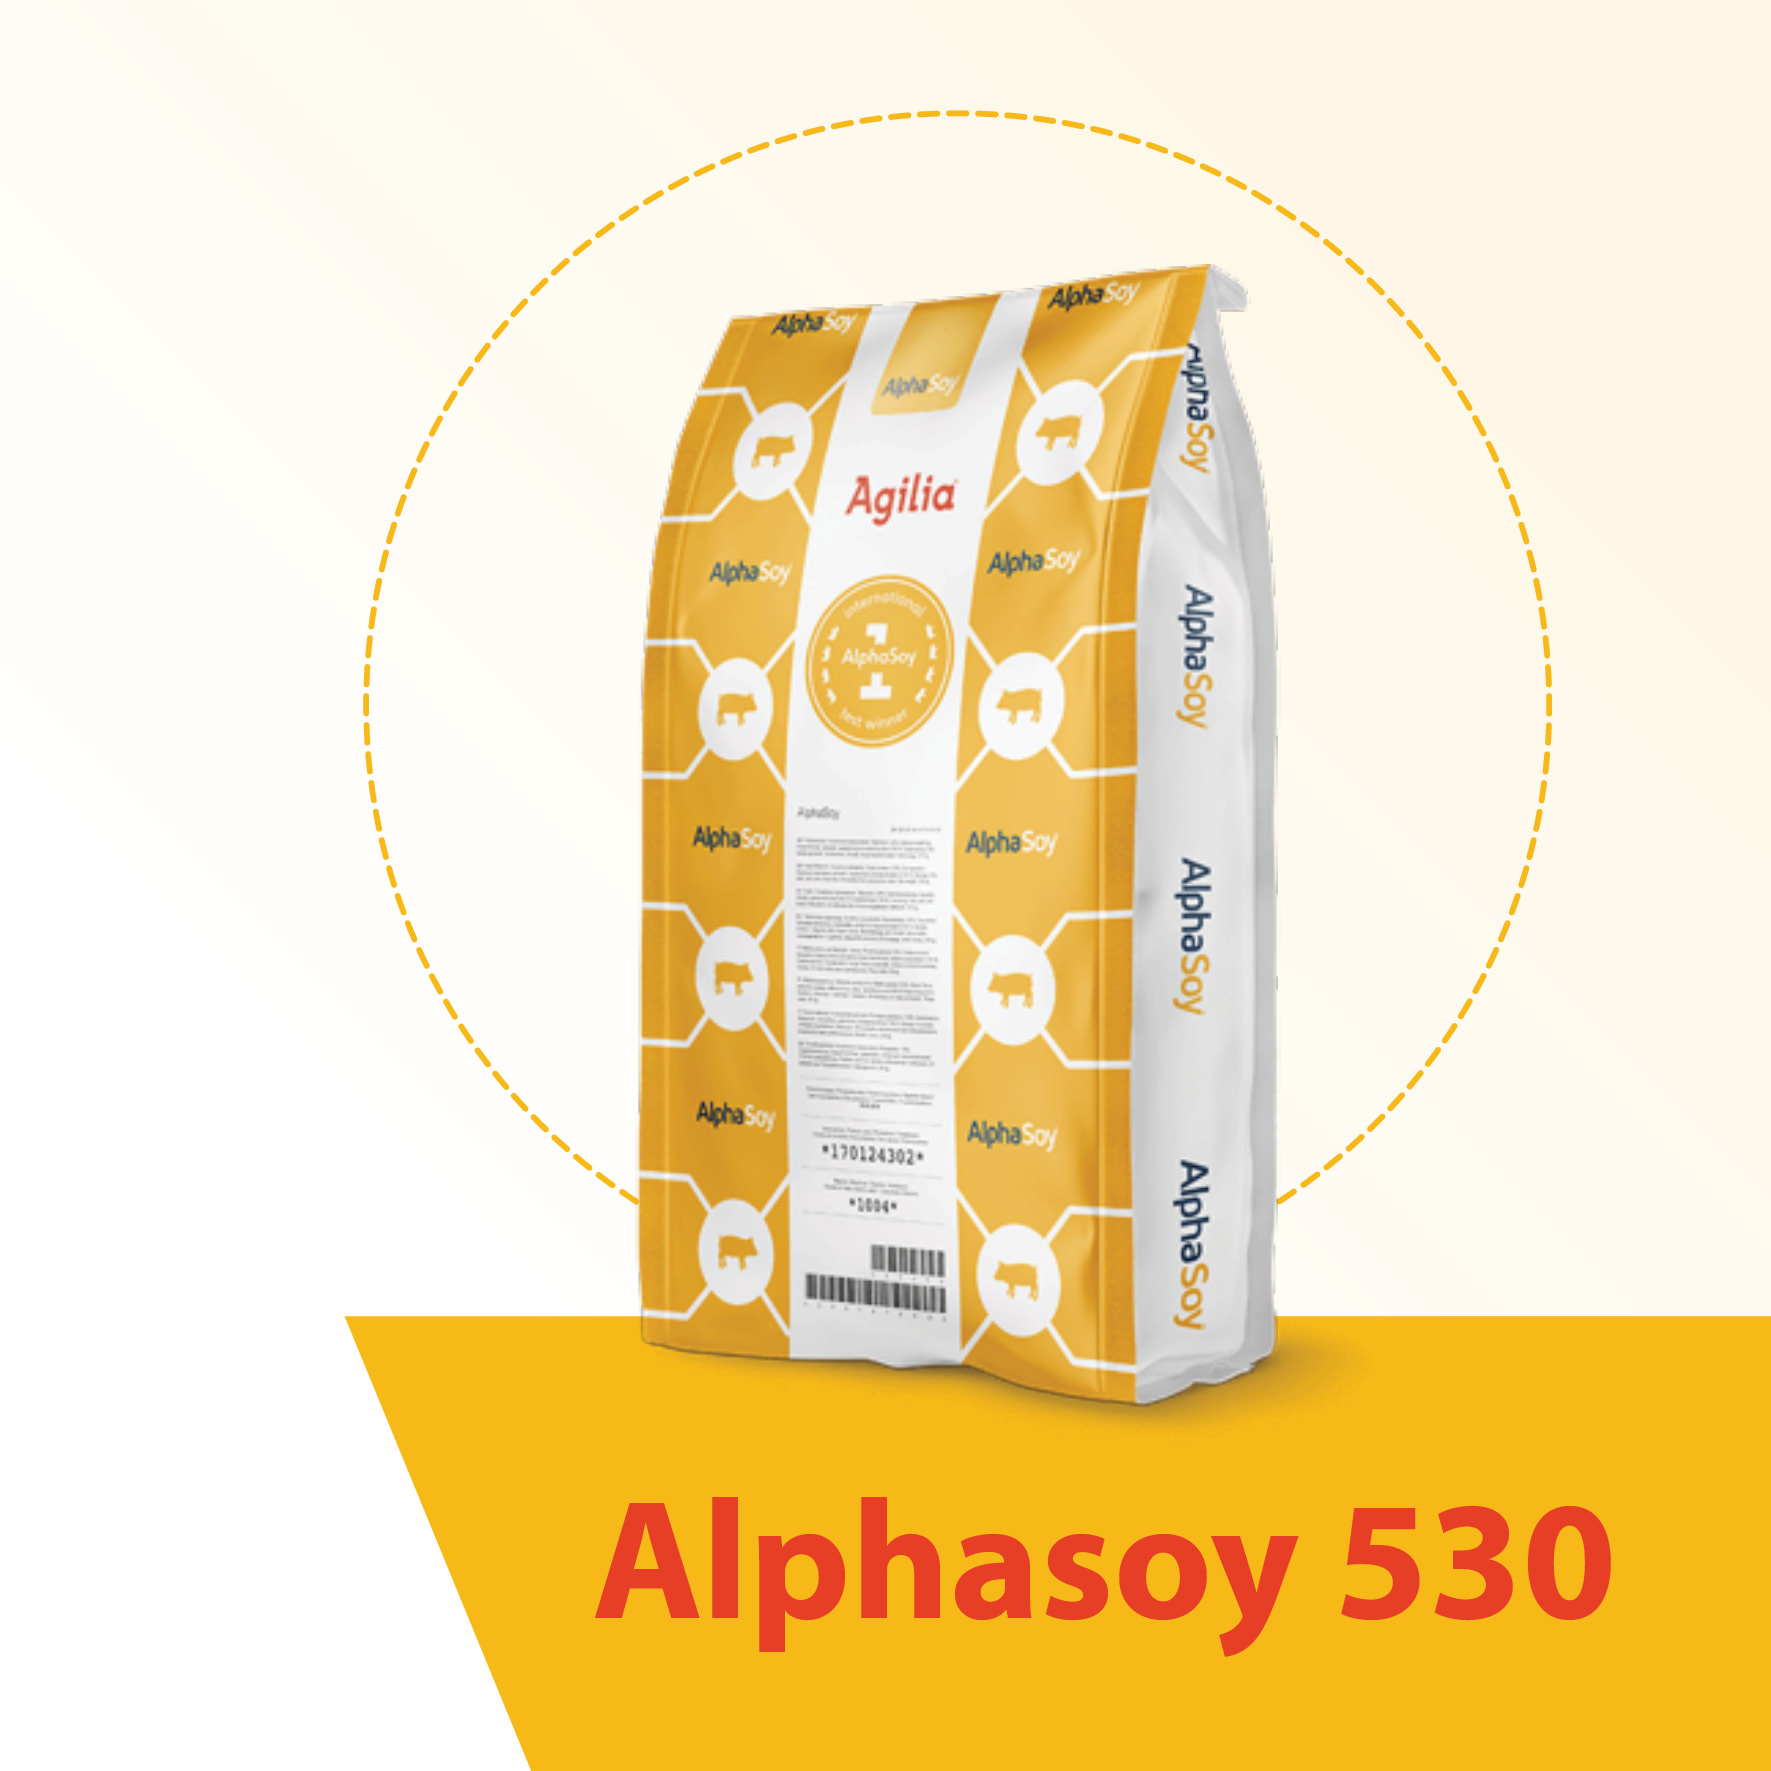 Alphasoy 530